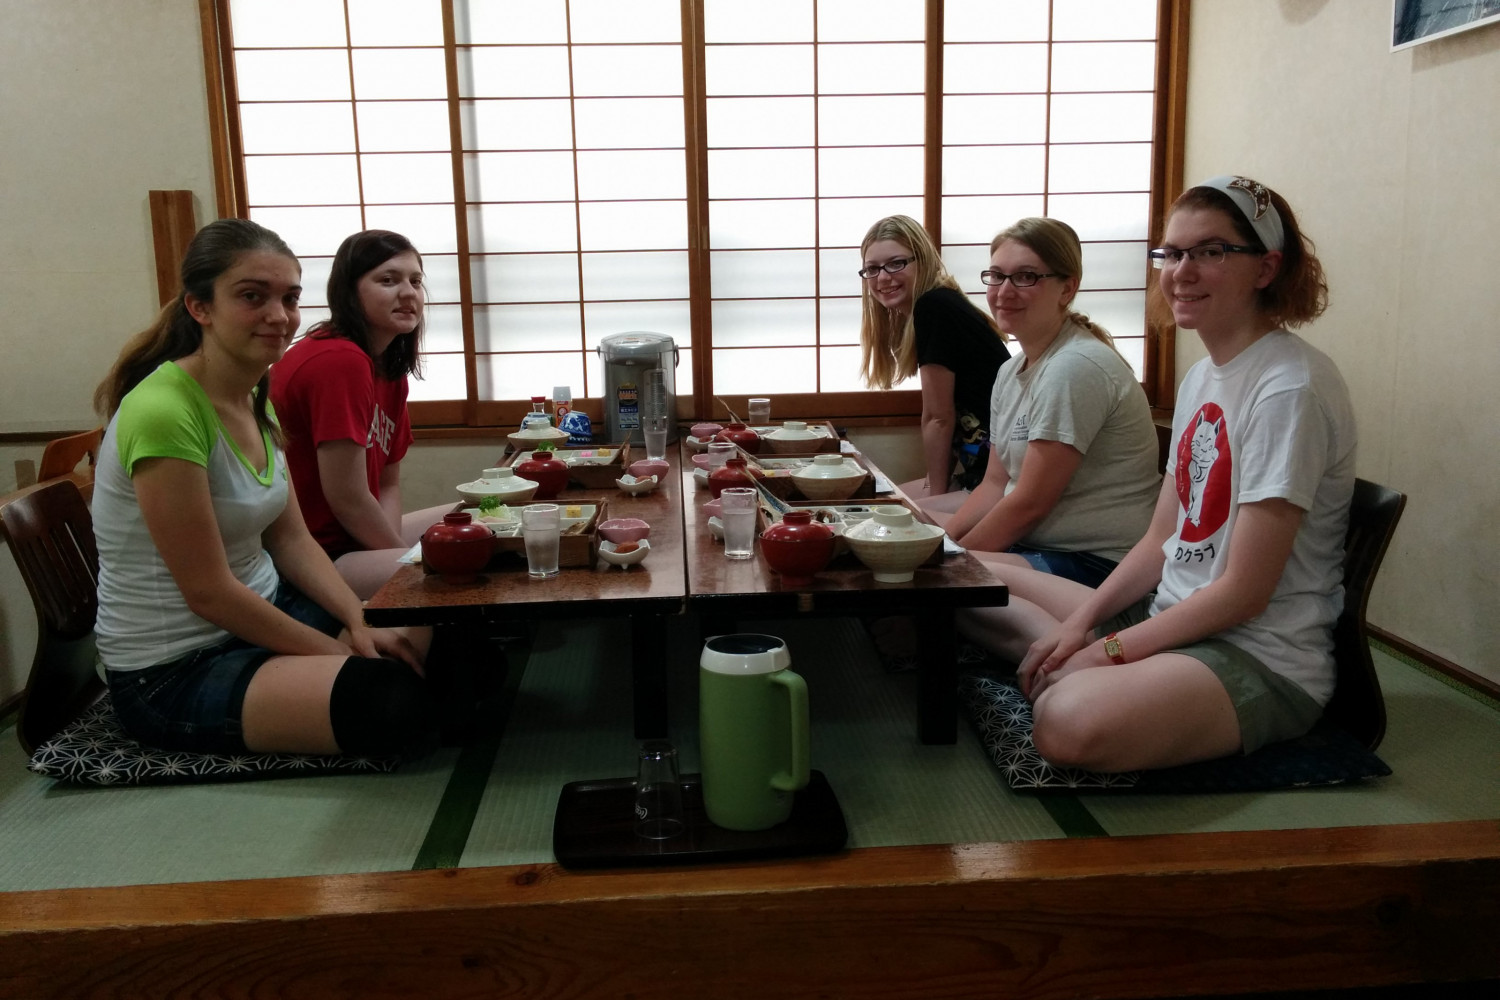 Students sitting for a traditional meal.